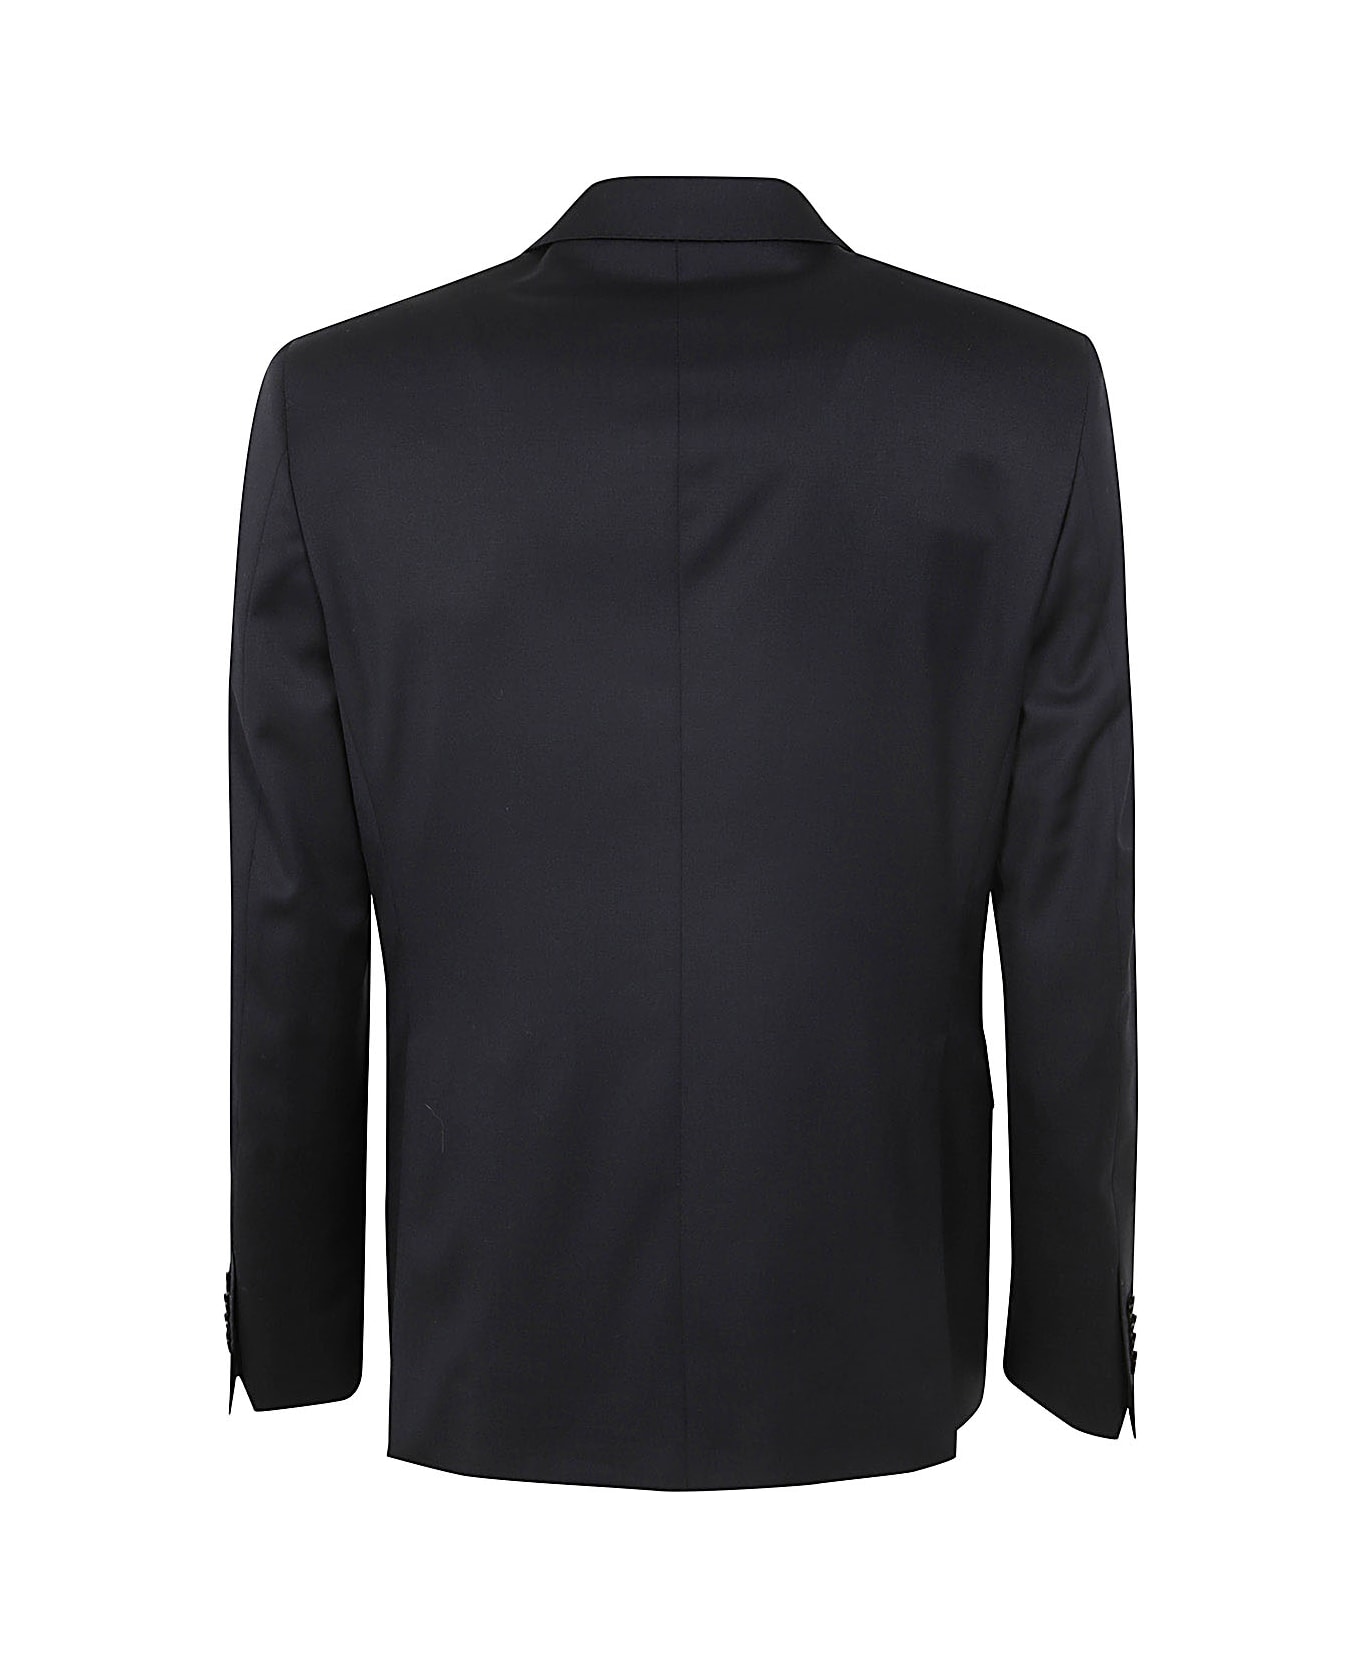 Tagliatore Classic Suit With Constructed Shoulder - Black